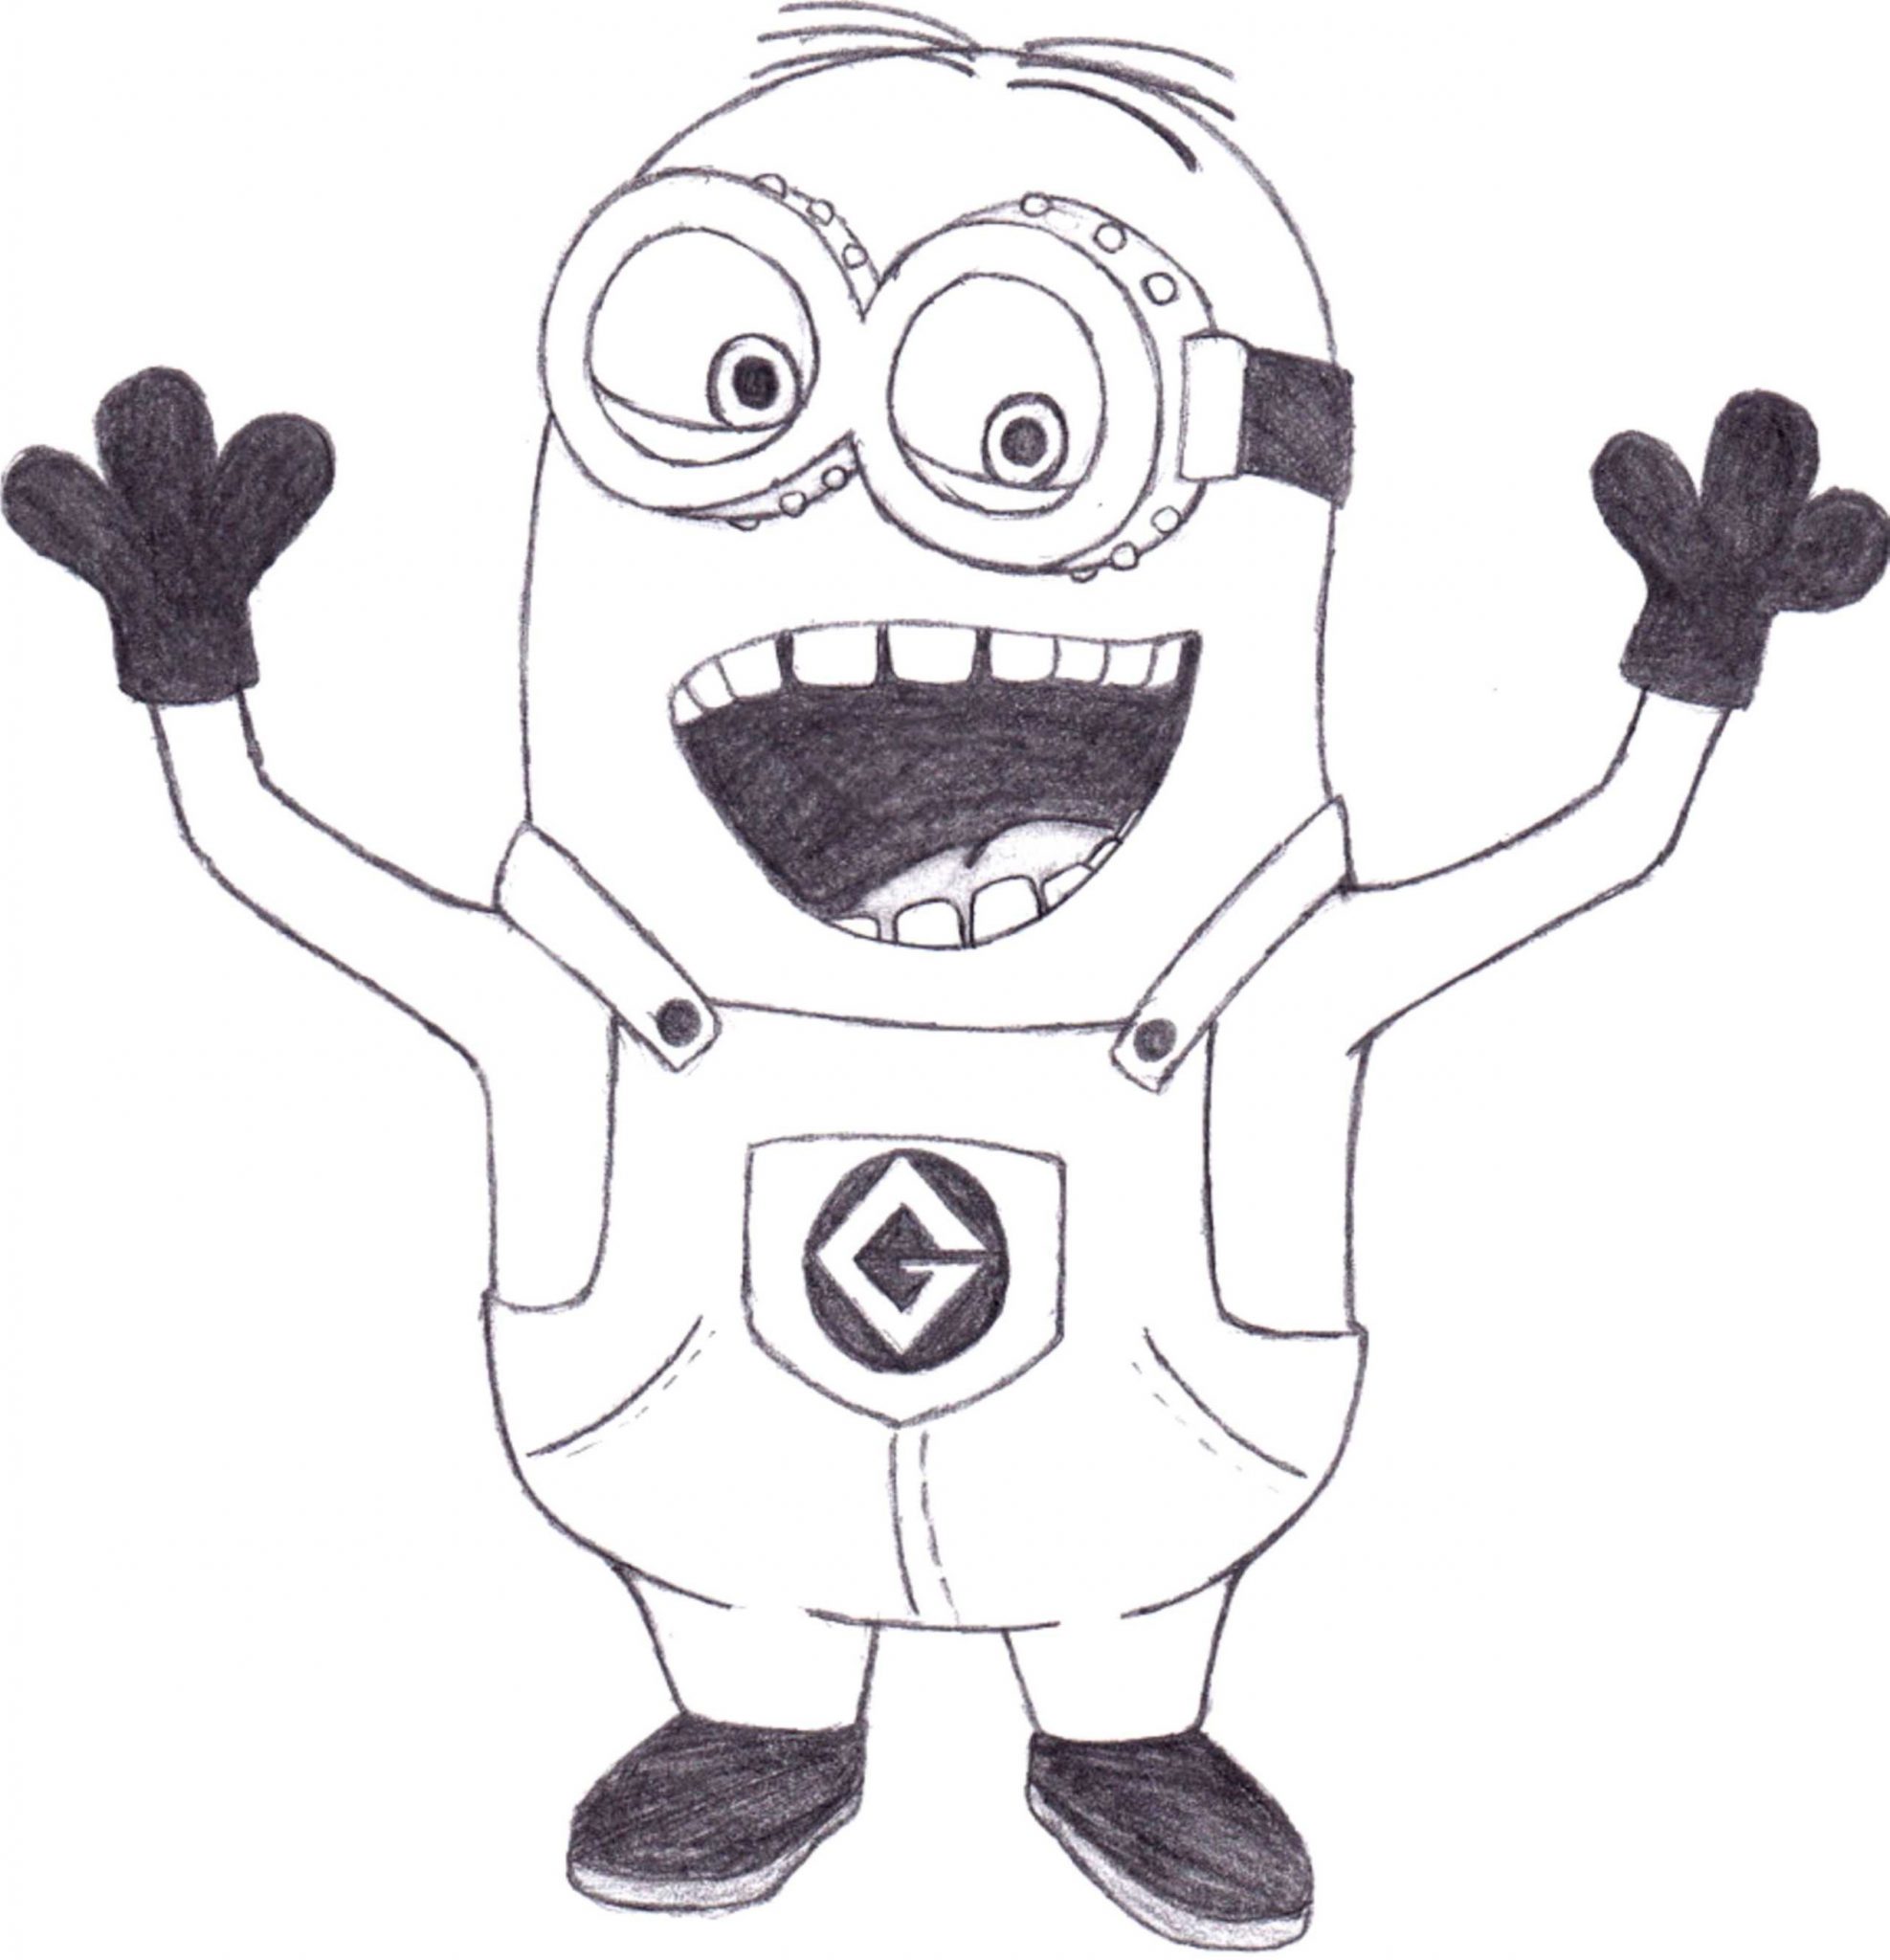 print download minion coloring pages for kids to have fun